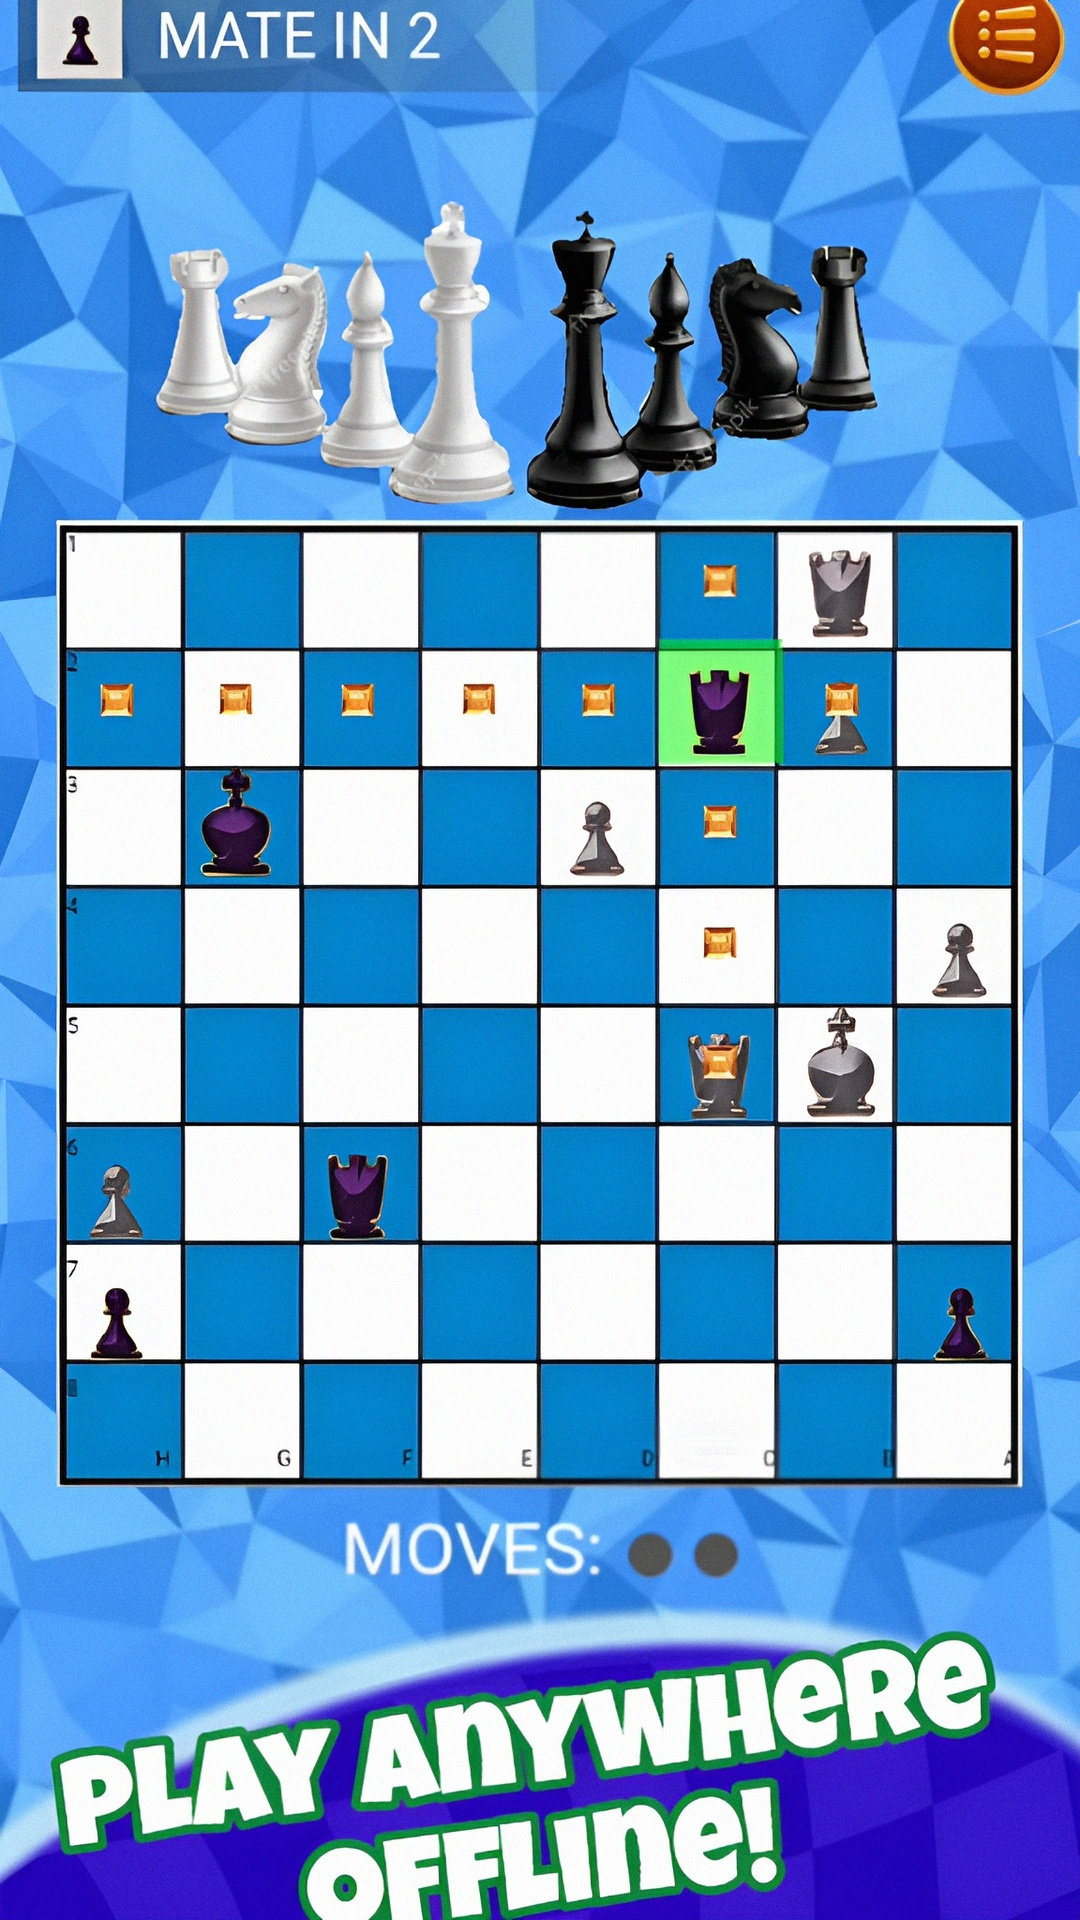 Screenshot of Mate in 1 Move: Chess Puzzle